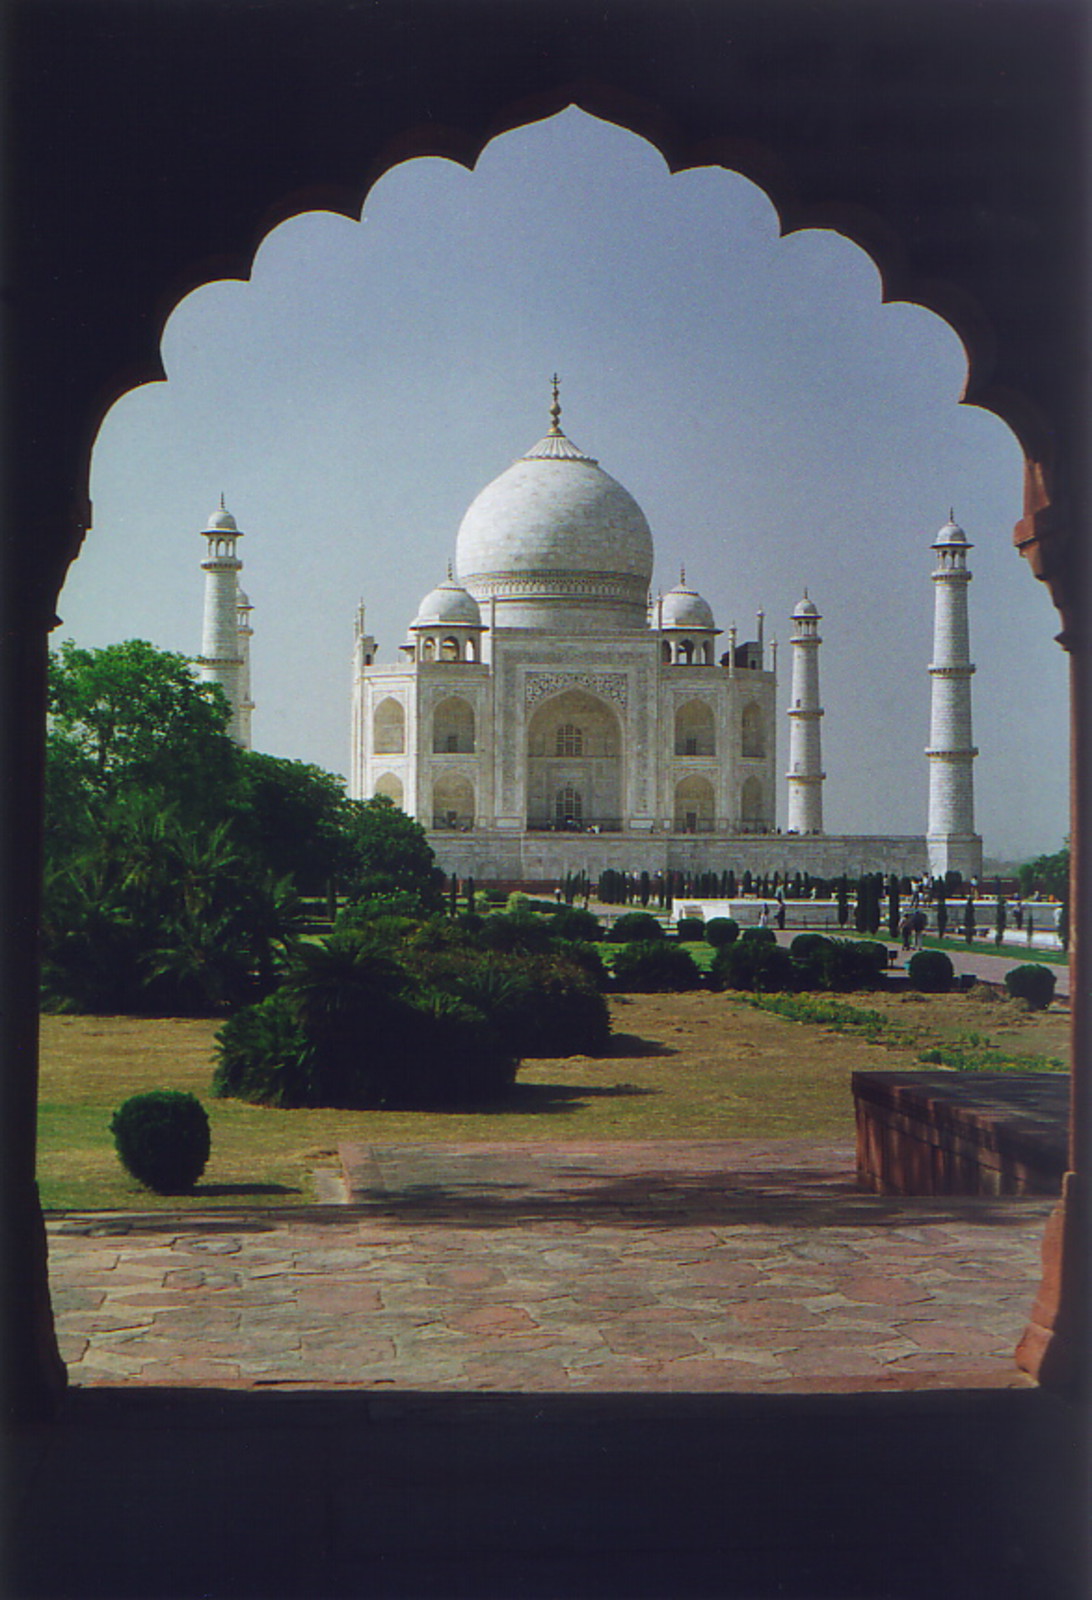 The Taj Mahal, viewed from a nearby building